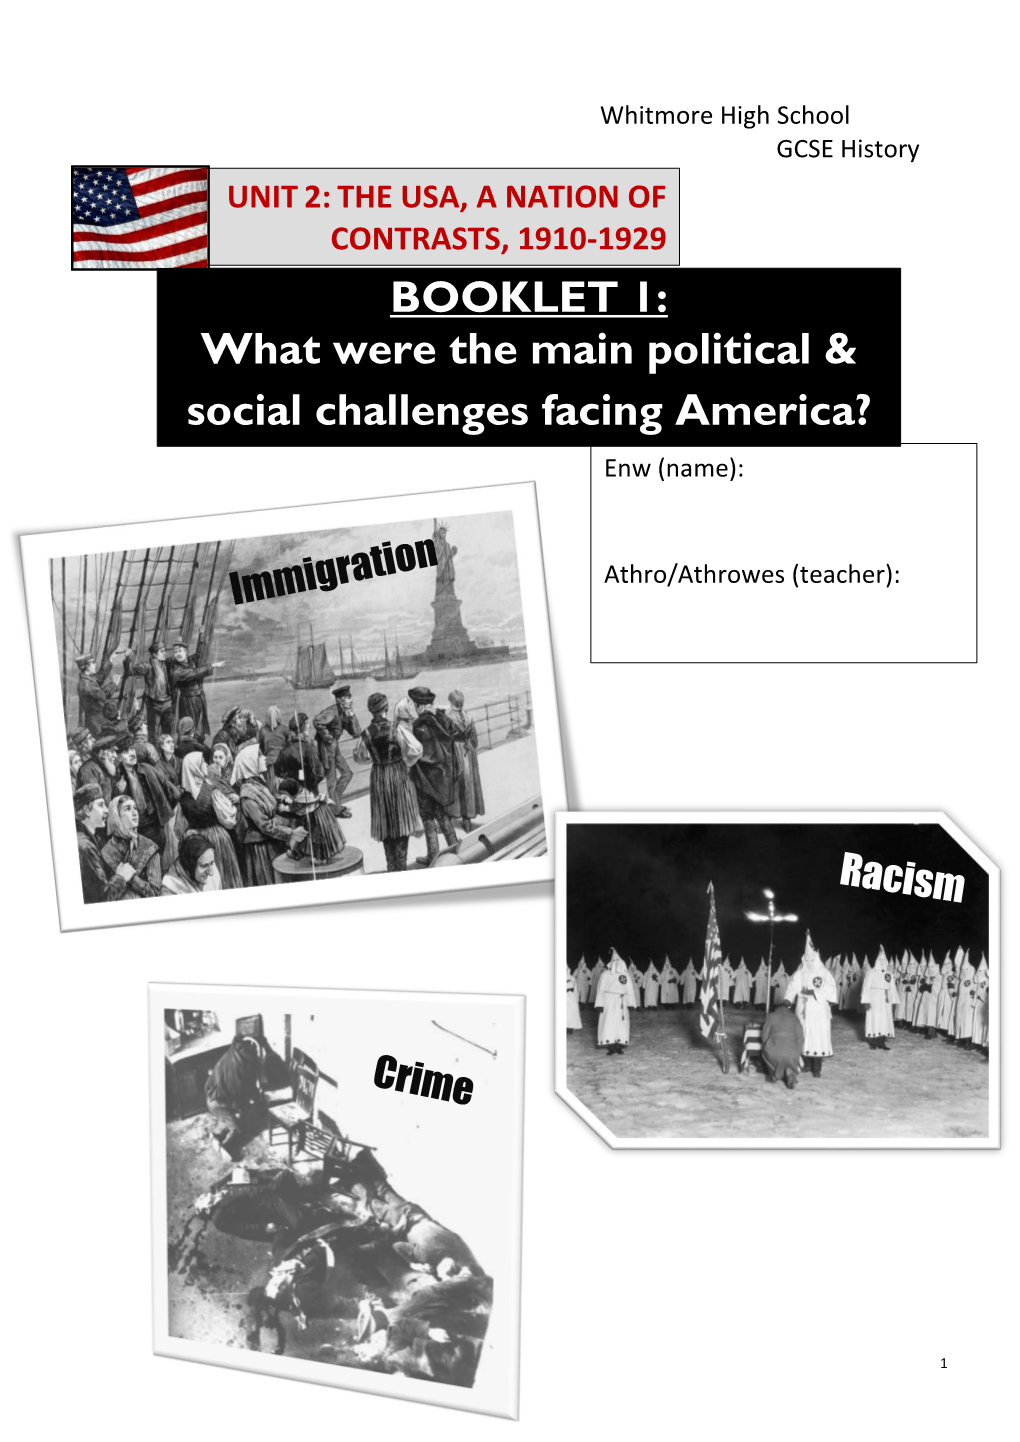 What Were the Main Political & Social Challenges Facing America?